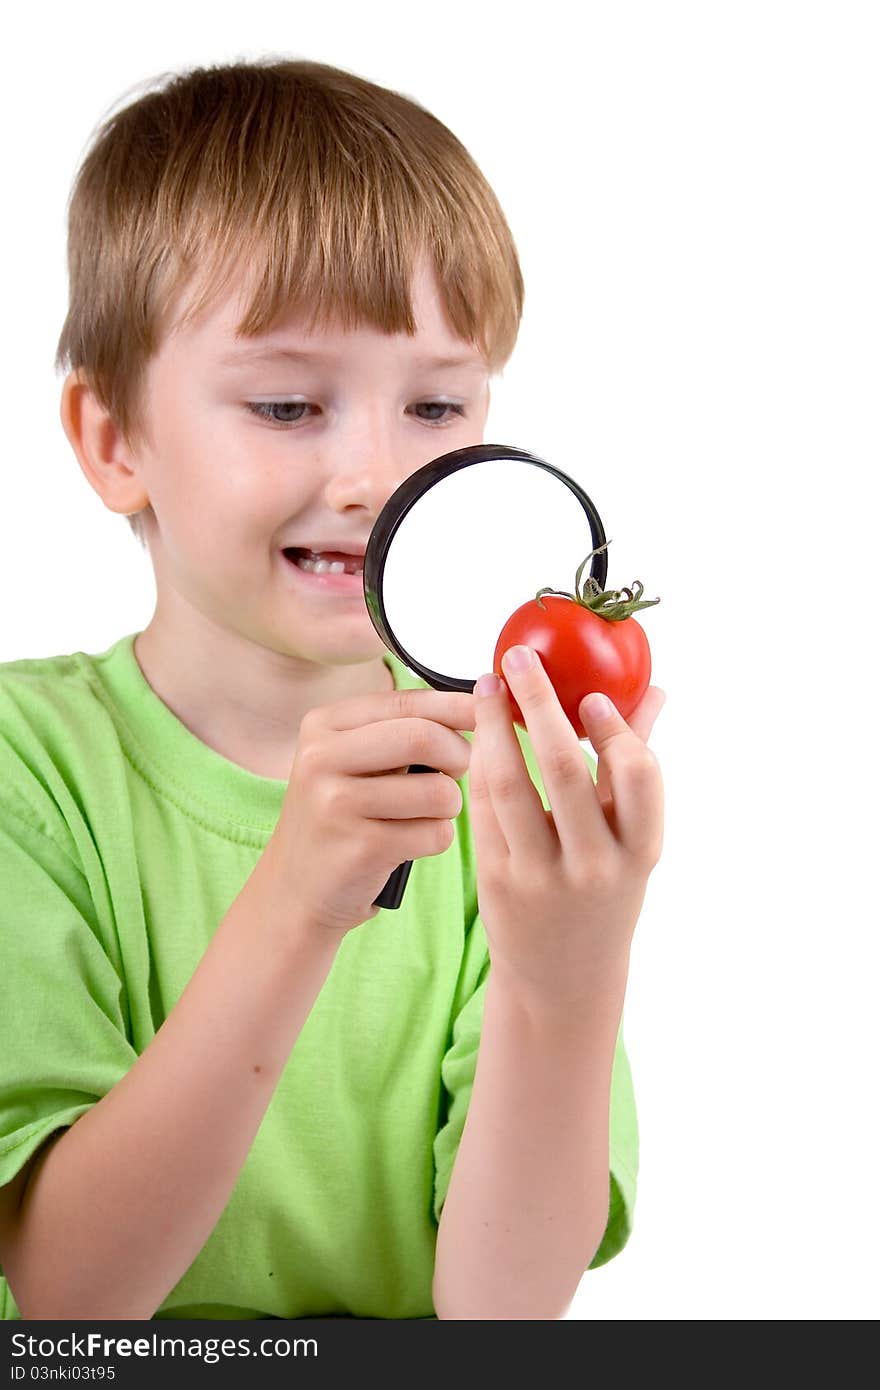 Boy examines a tomato with a magnifying glass isolated on a white background